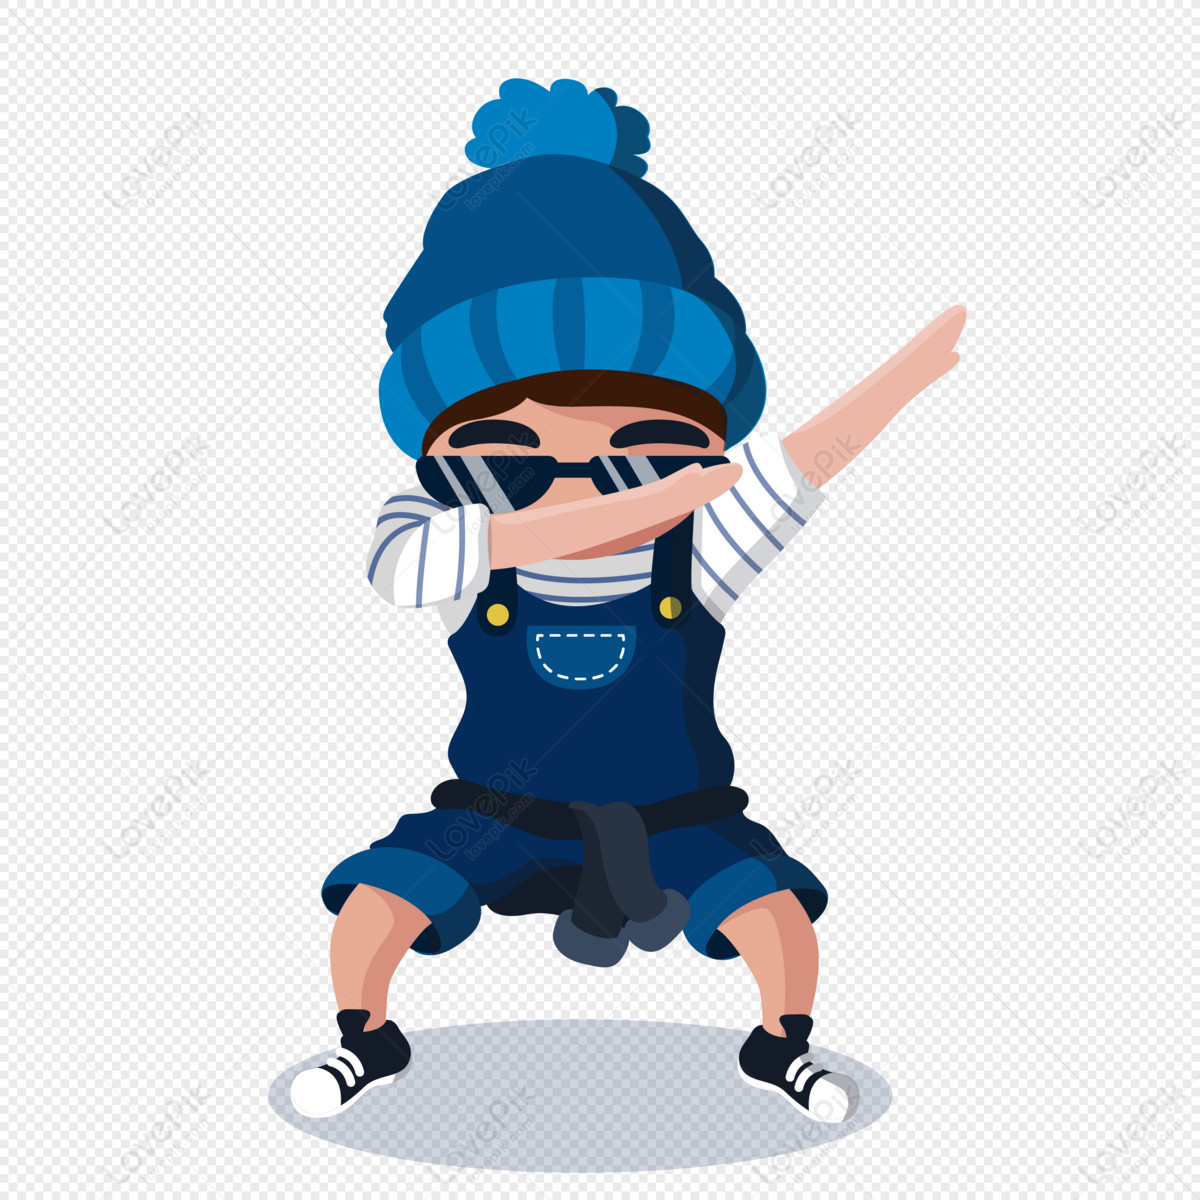 Funny Little Boy PNG Transparent And Clipart Image For Free Download -  Lovepik | 400947356